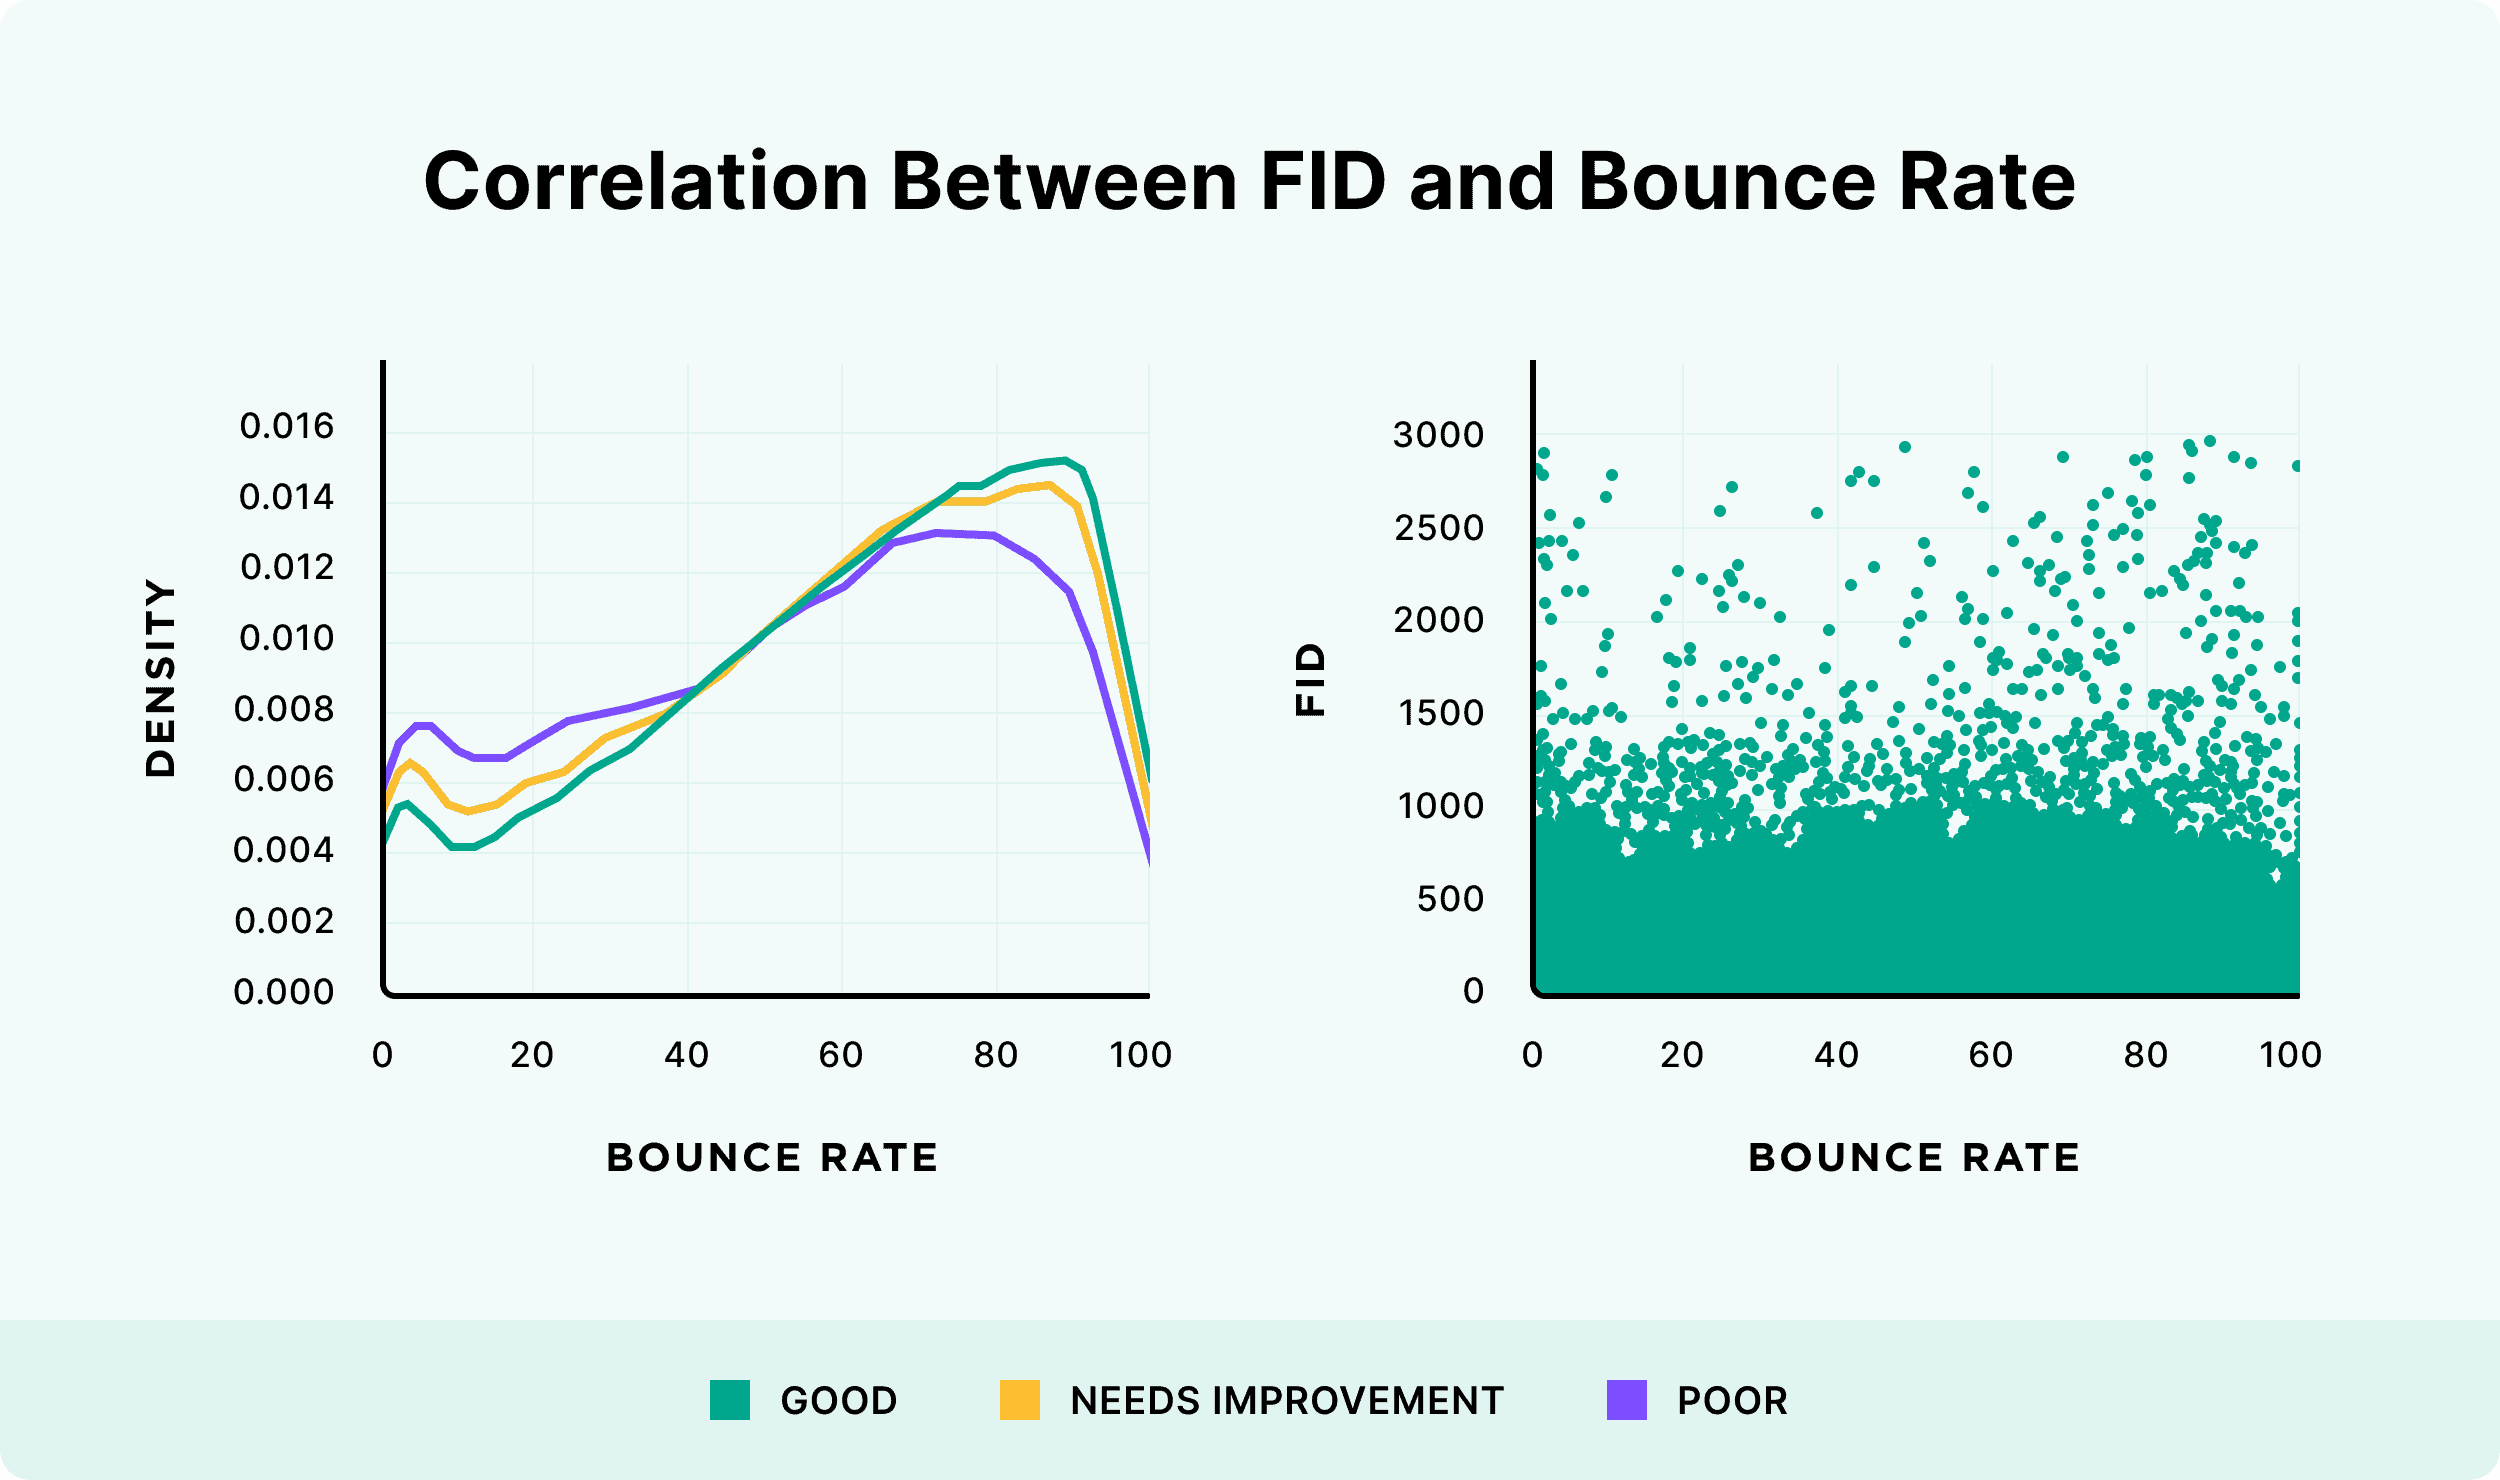 Correlation between FID and bounce rate